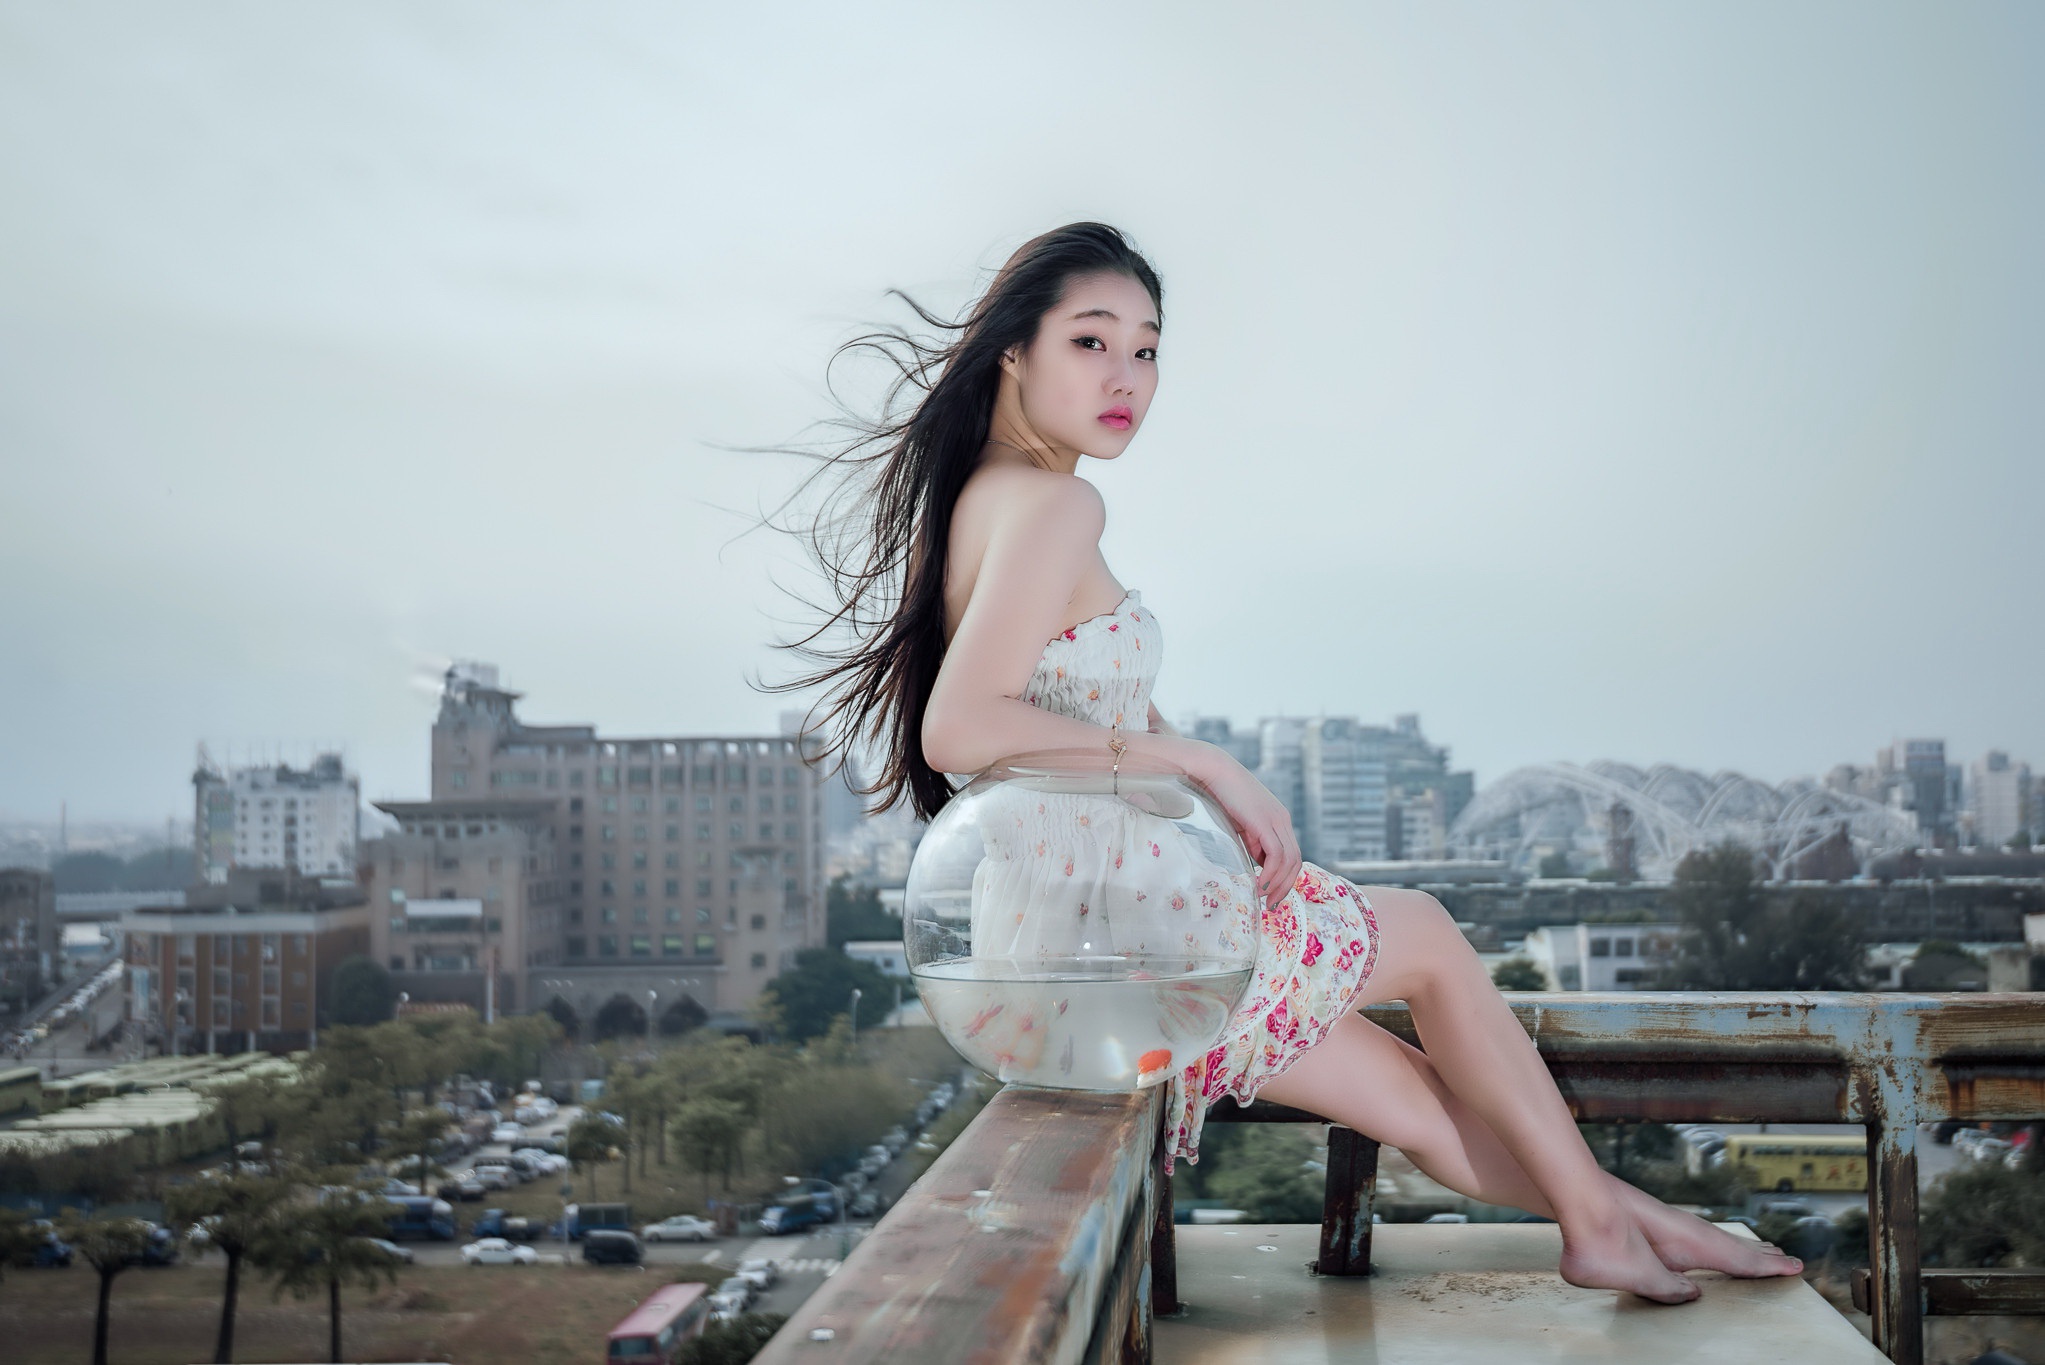 Asian Women Rooftopping Looking At Viewer Long Hair Dark Hair Makeup Pink Lipstick Cityscape Sitting 2045x1365